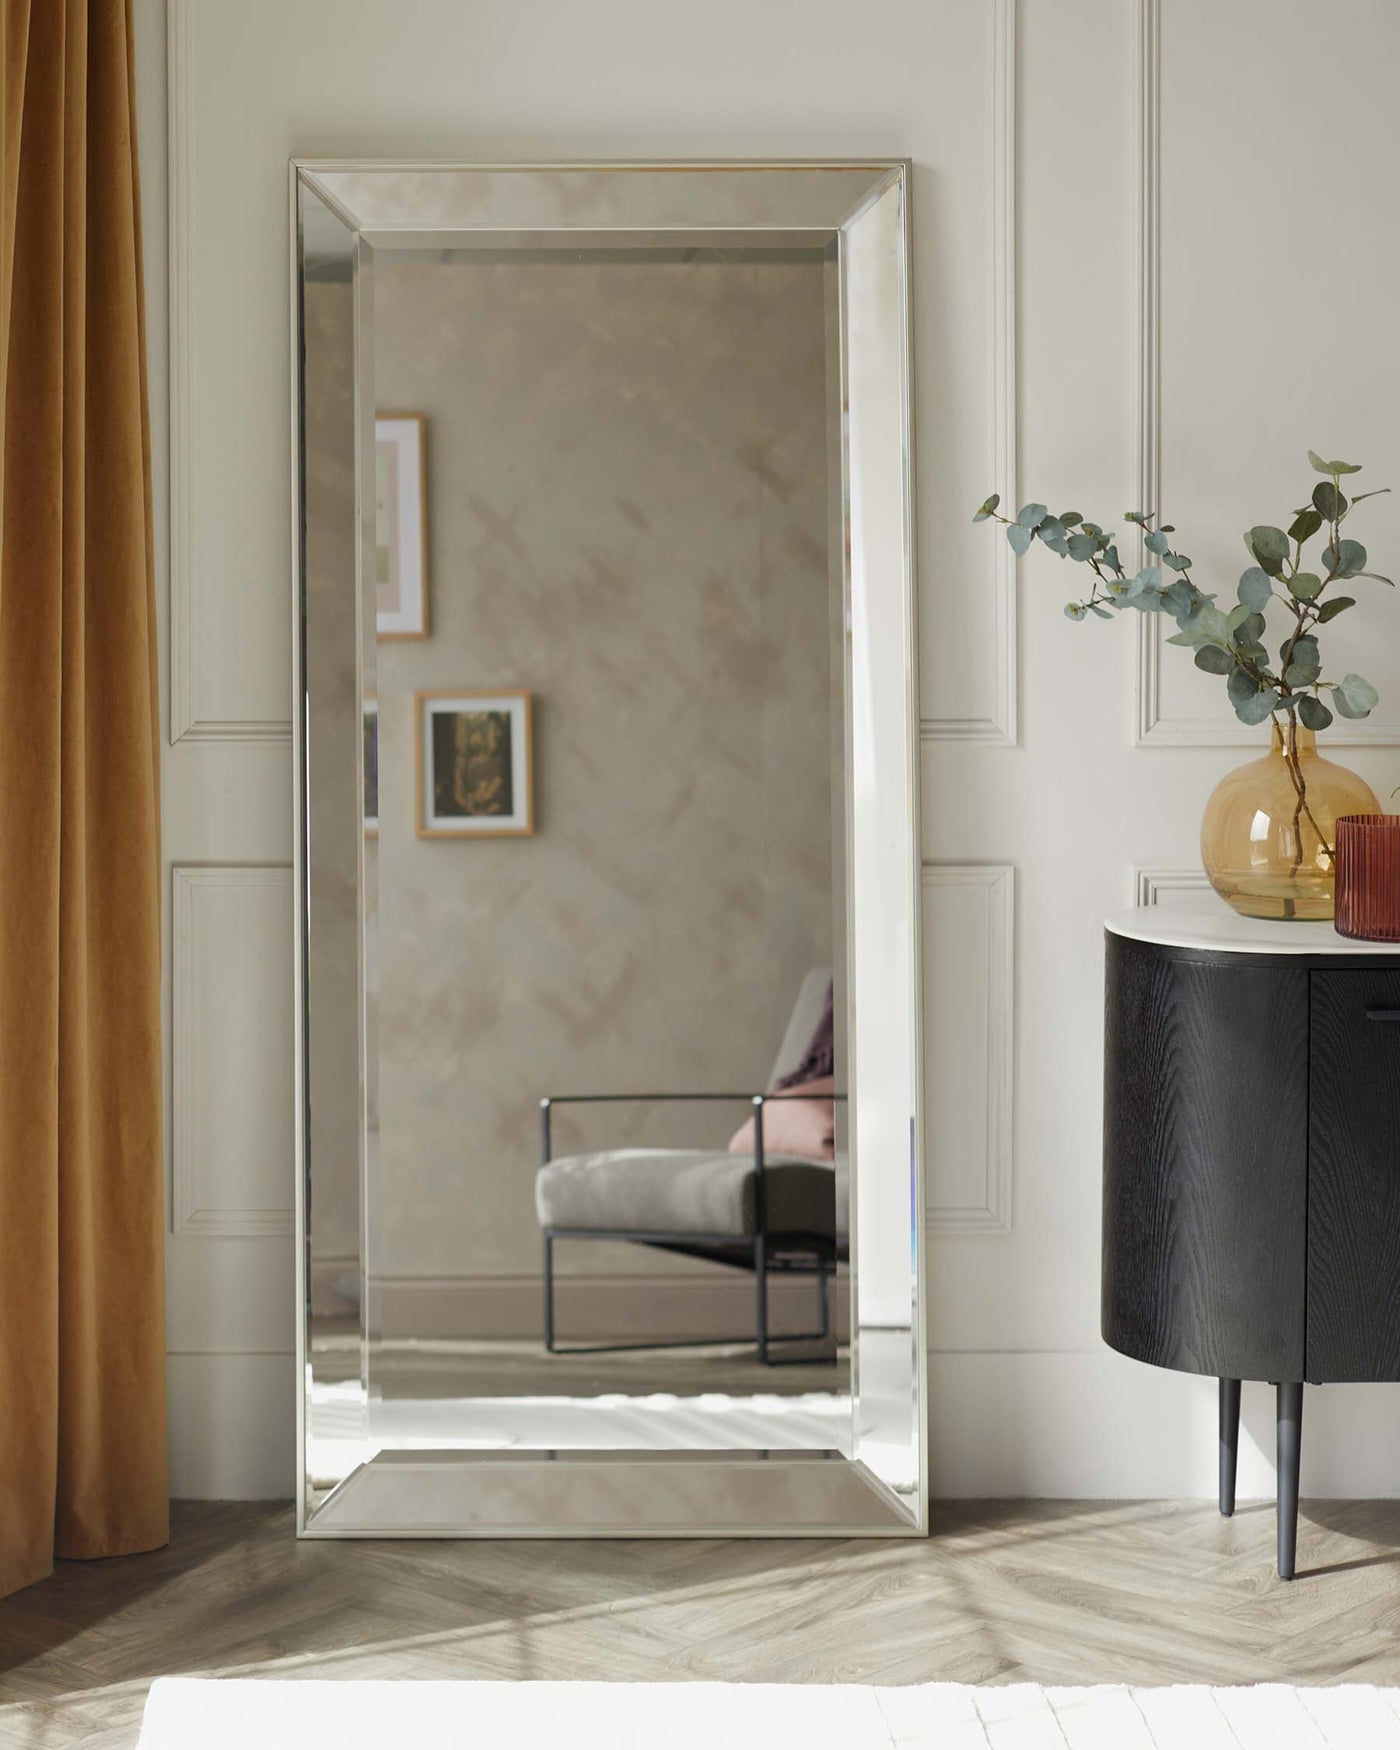 A large, floor-standing mirror with a sleek, bevelled frame, and a round, black contemporary sideboard with elegant, tapered legs. The sideboard is adorned with a glass vase holding eucalyptus branches and adjacent to it, a round, amber-coloured glass vase.